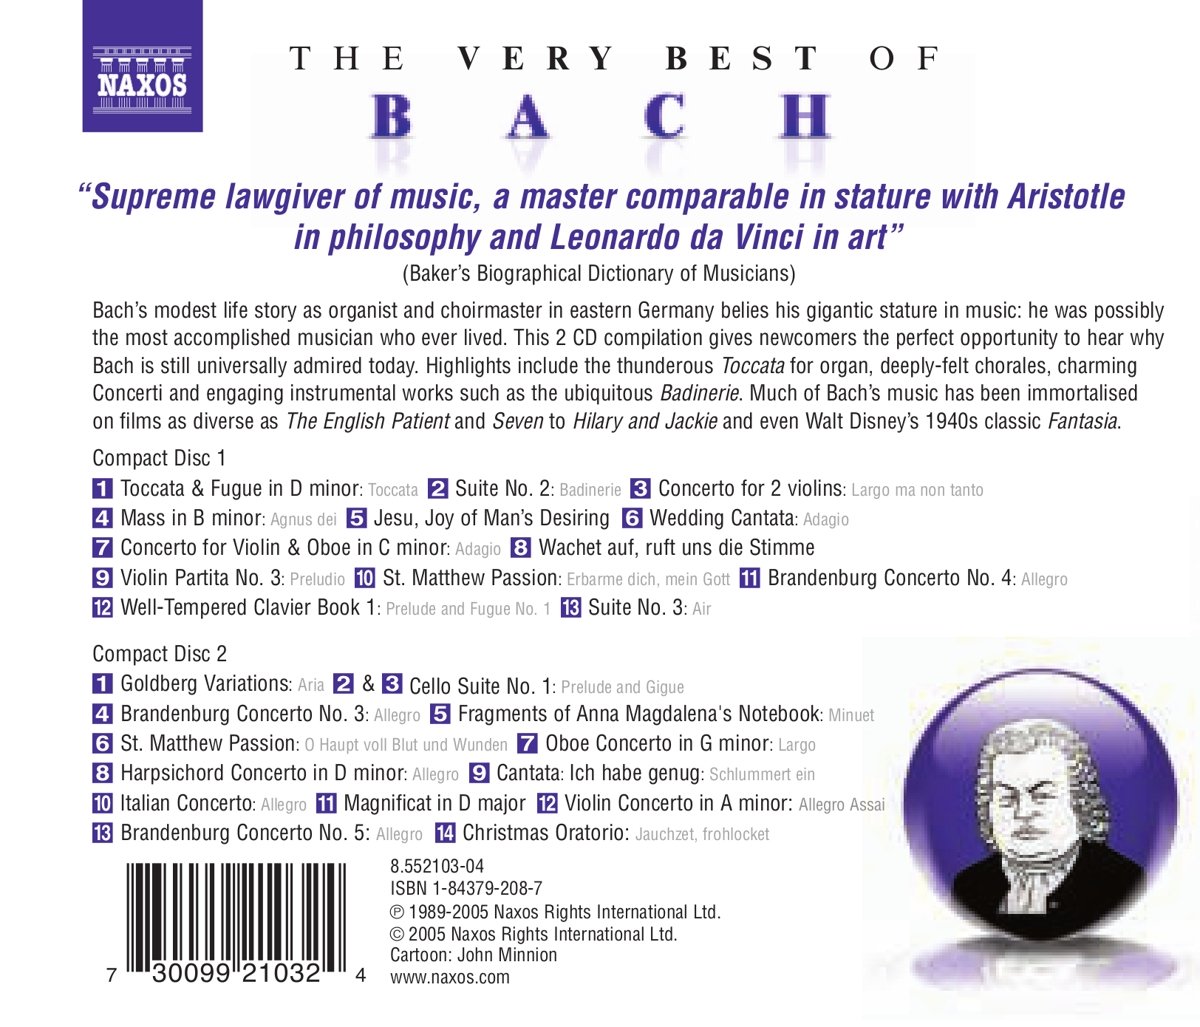 THE VERY BEST OF BACH - slide-1